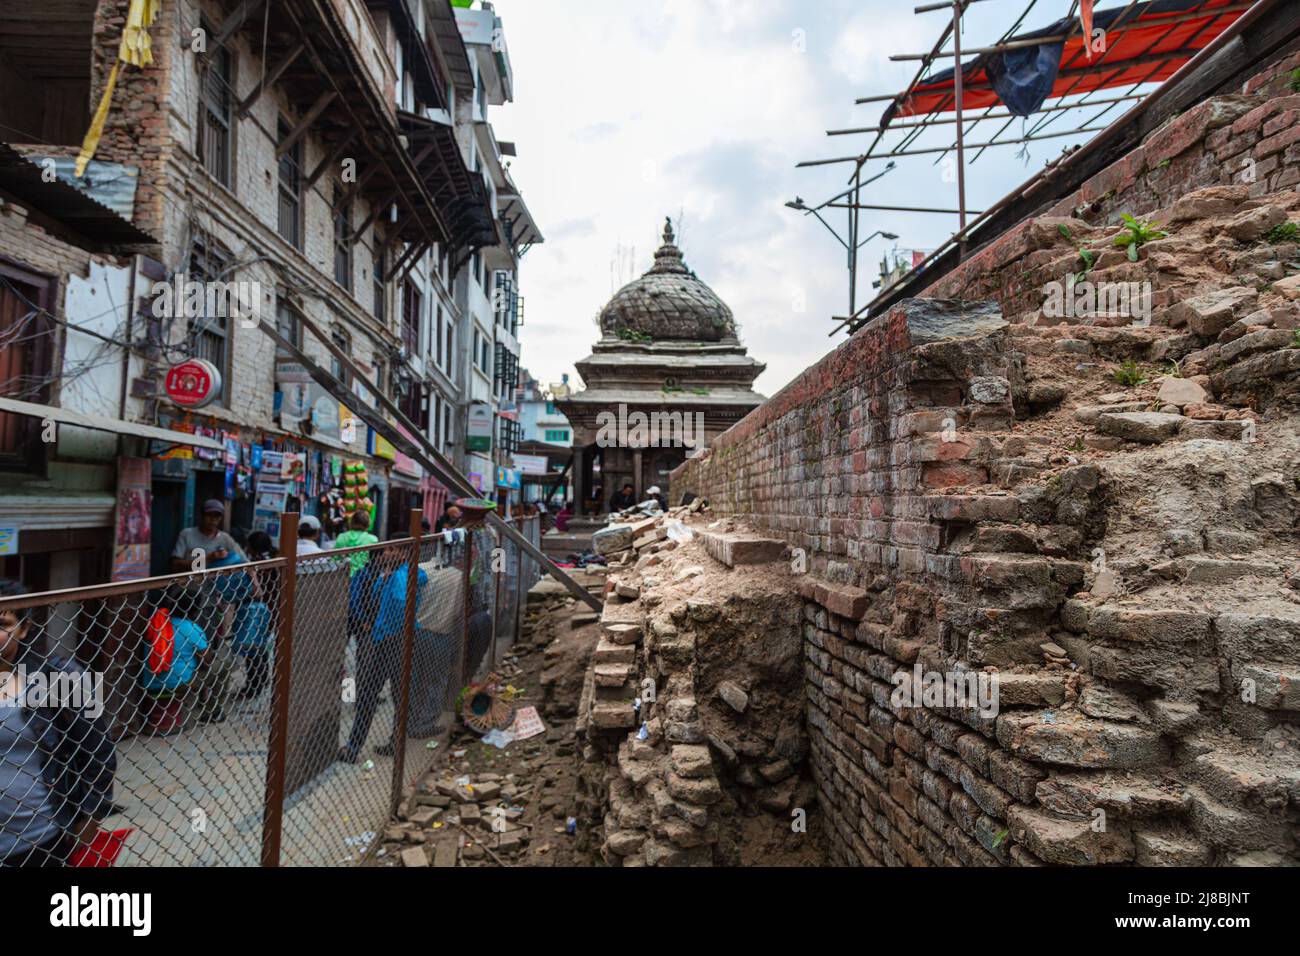 Lalitpur, Nepal - October 27, 2021: People walking in the streets of Lalitpur metropolitan city, Nepal, Asia, the fourth most populous city of Nepal. Stock Photo